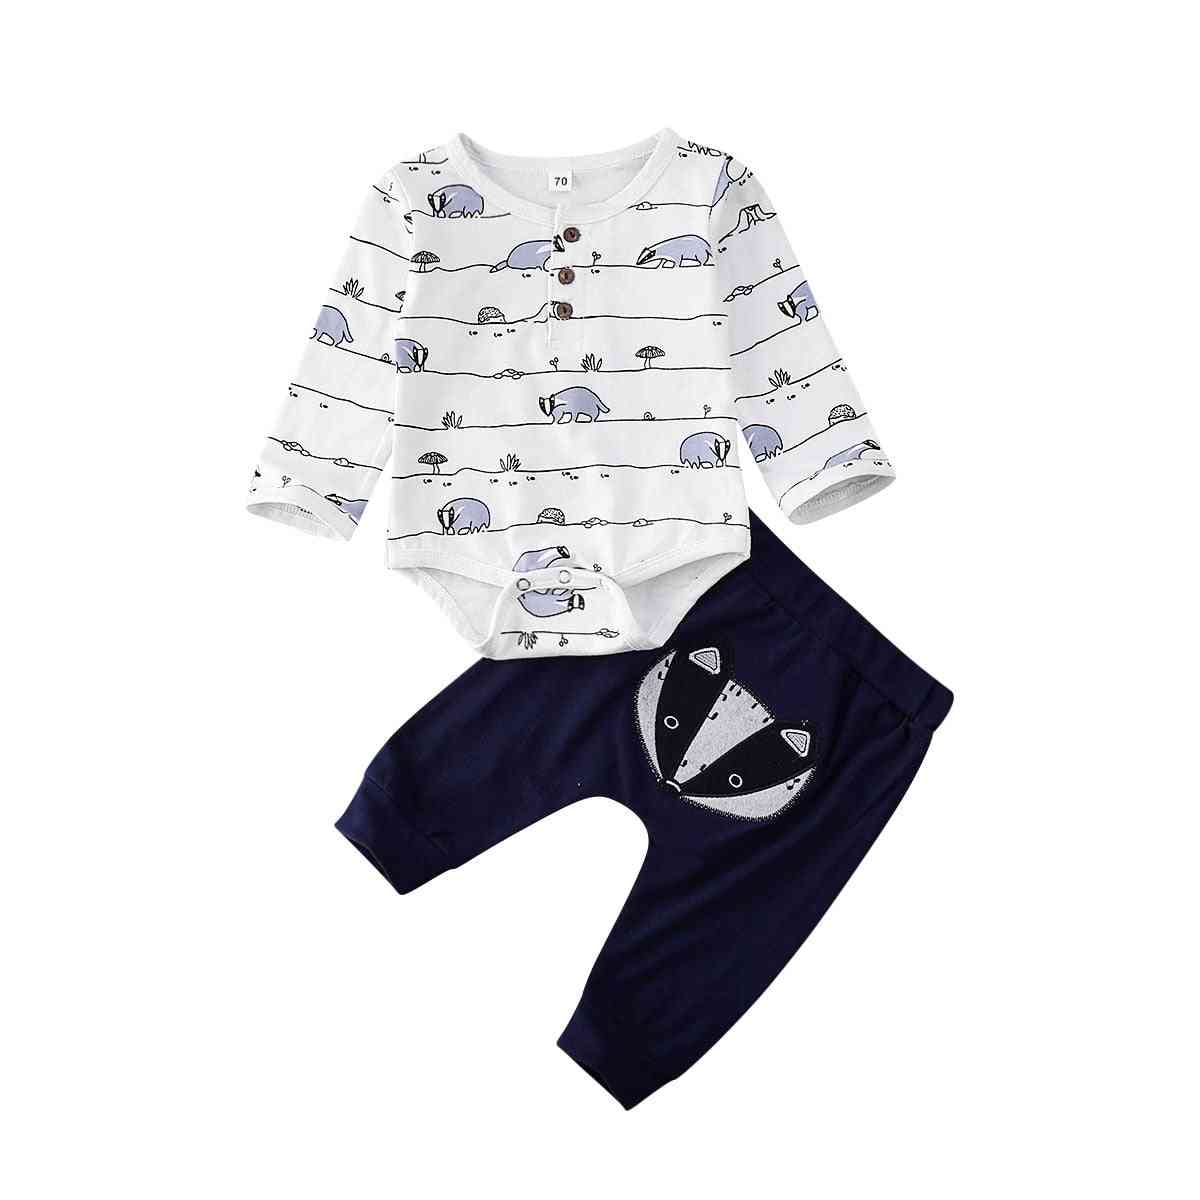 Baby Boy/ Girl, Fox Print Tops, Long Pants Outfits Clothes